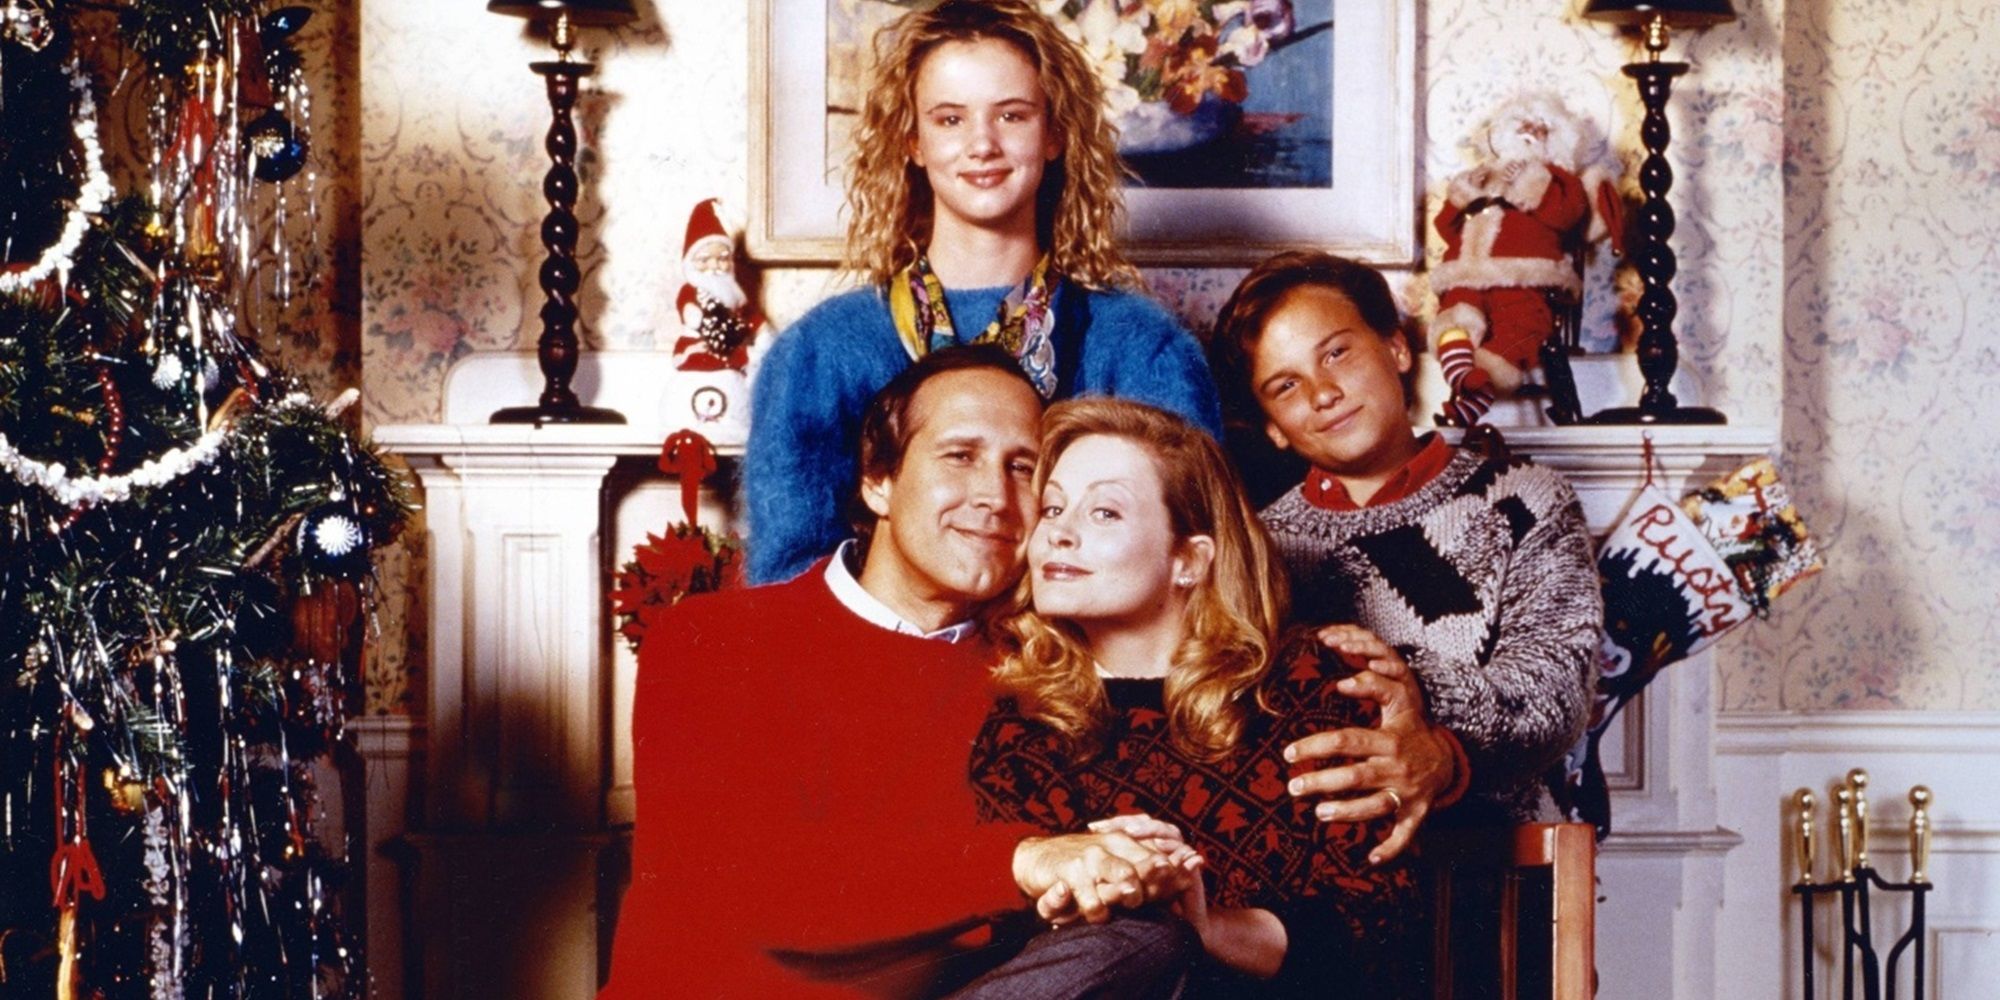 The Griswold family posing by the tree in Christmas Vacation